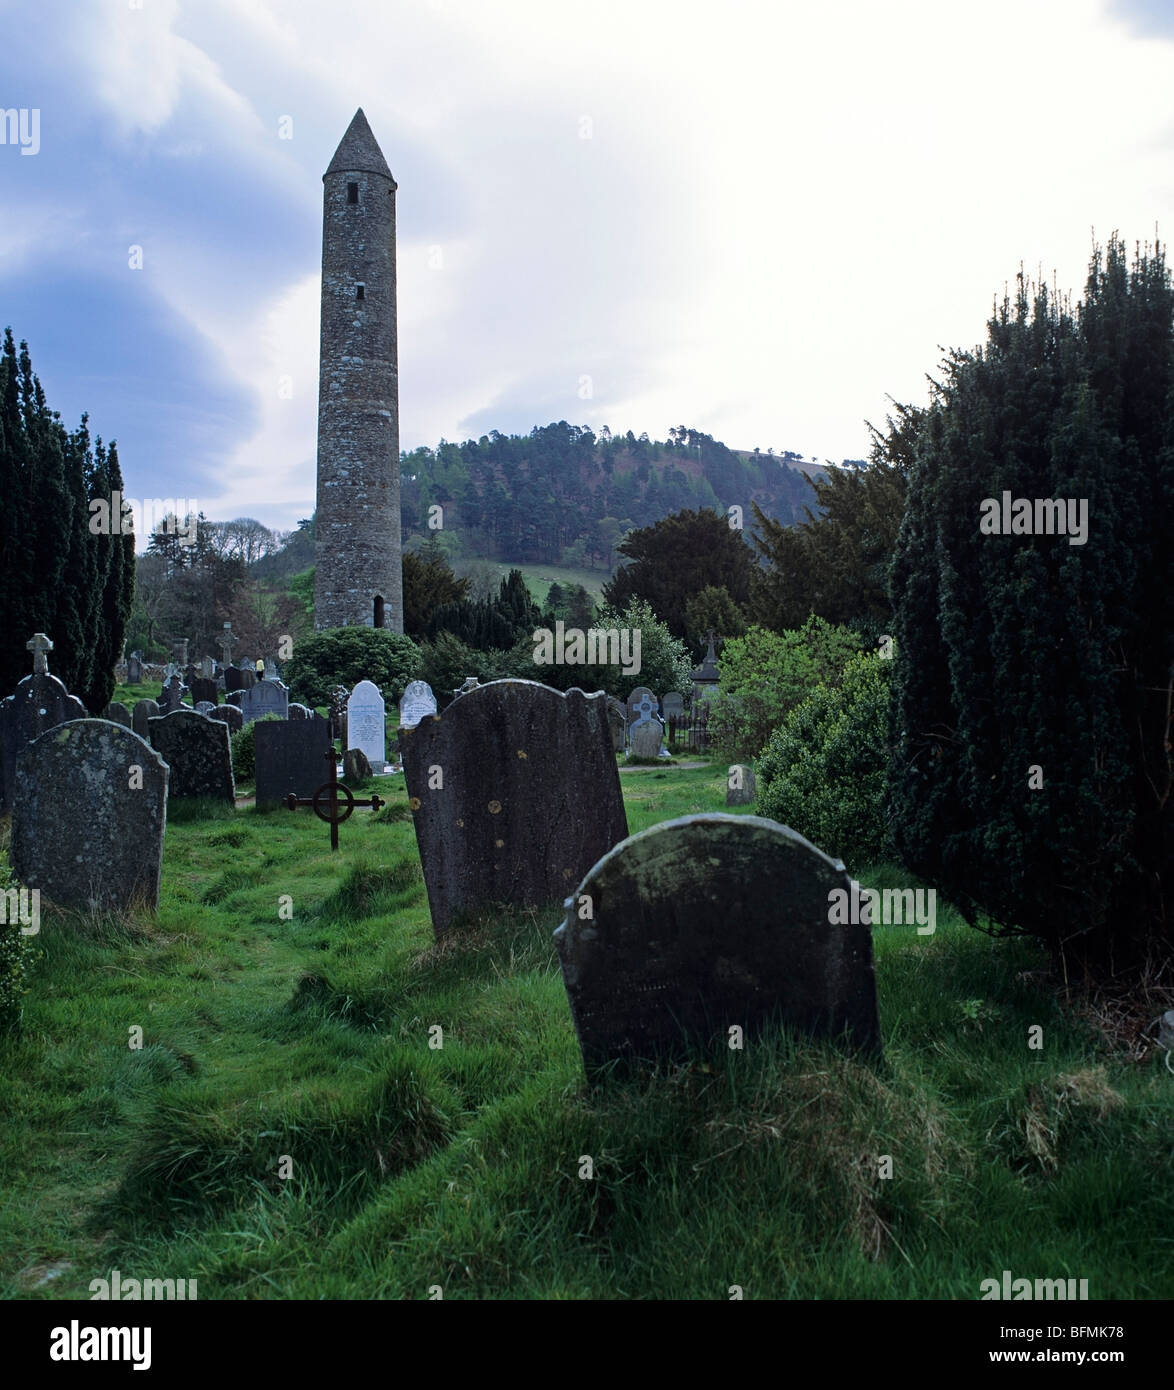 Restored round tower in graveyard of the monastic ruins at Glendalough in County Wicklow in Ireland Stock Photo